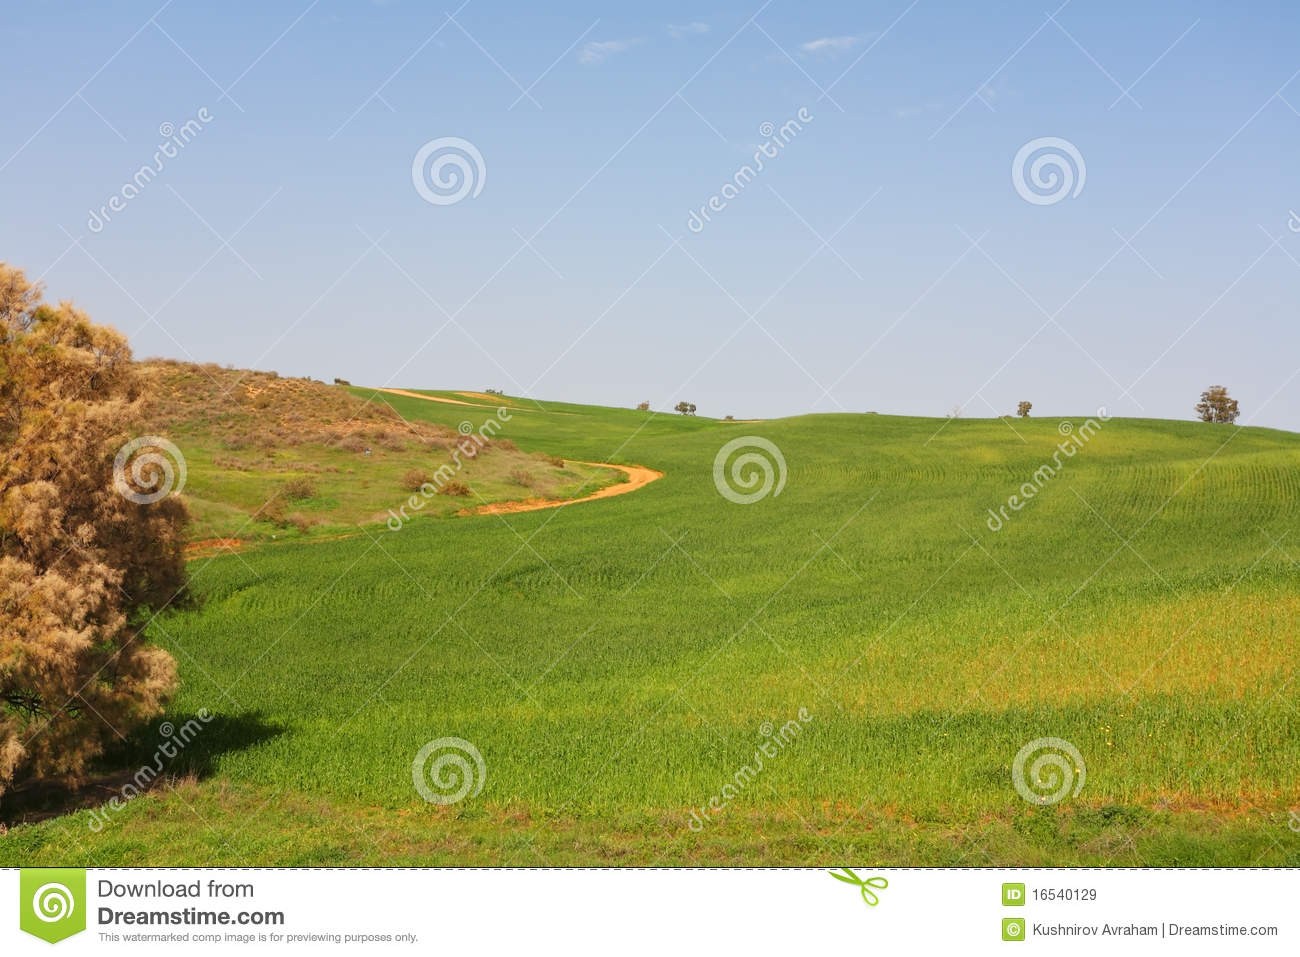 Green Fields And Clear Skies Royalty Free Stock Images   Image